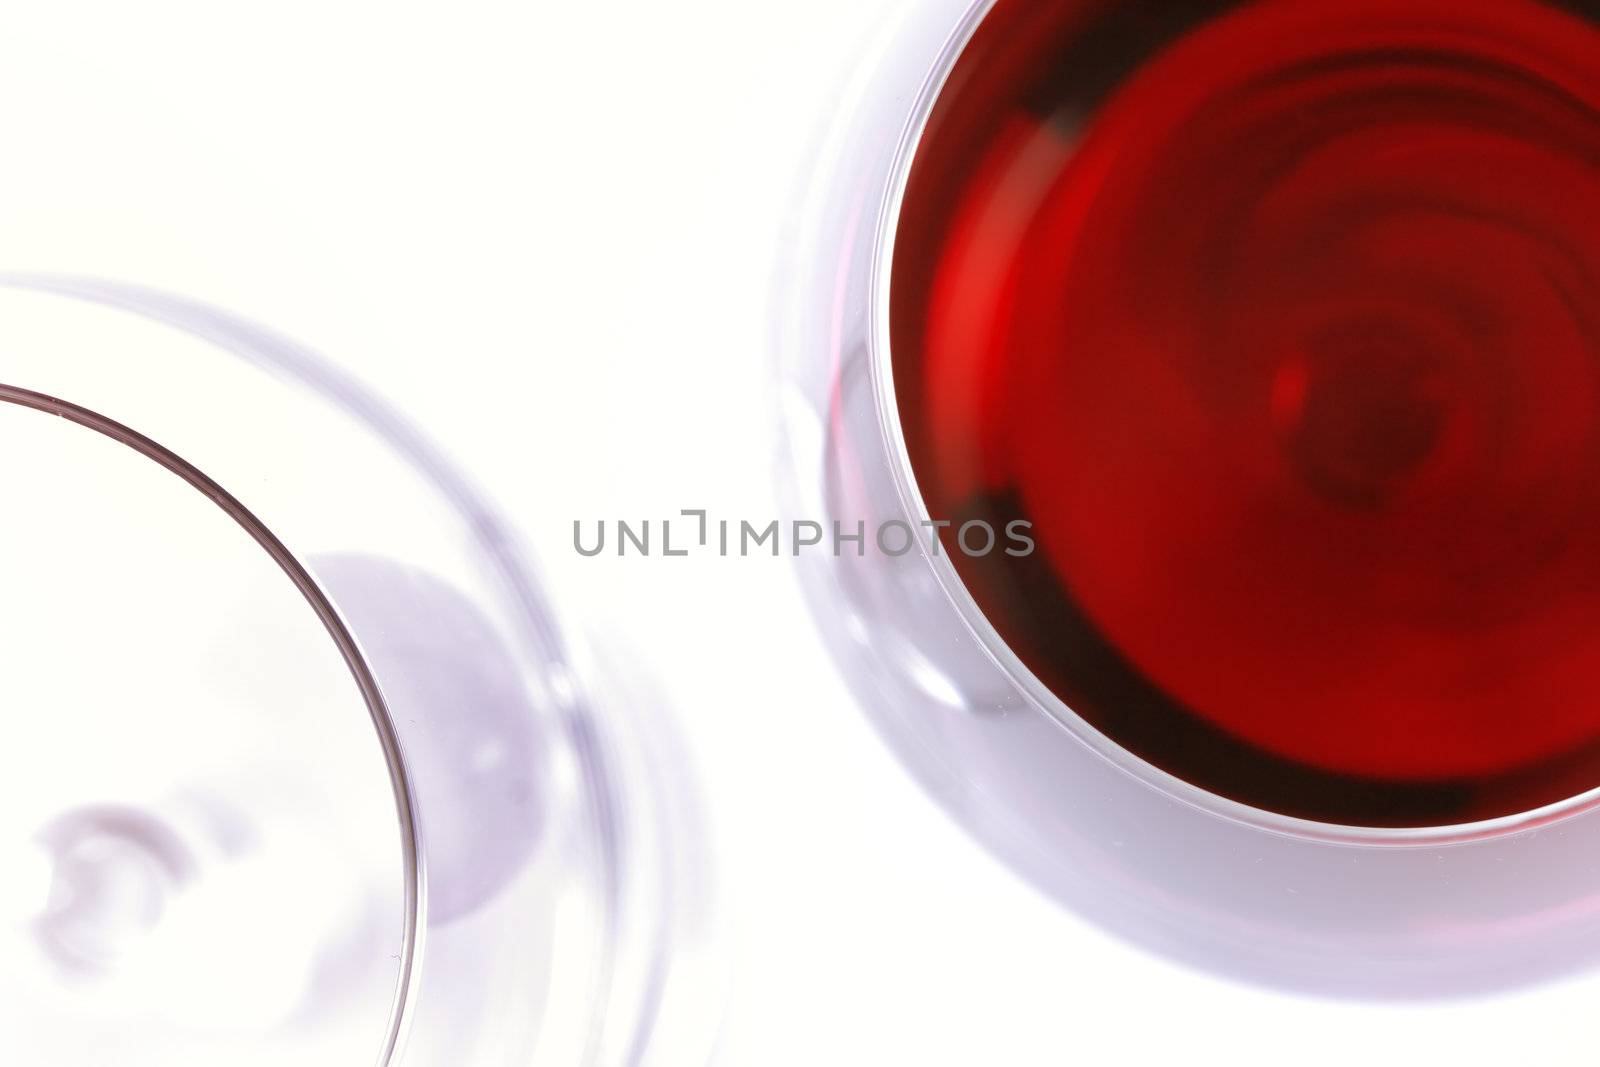 abstract red wine glasses shot from above